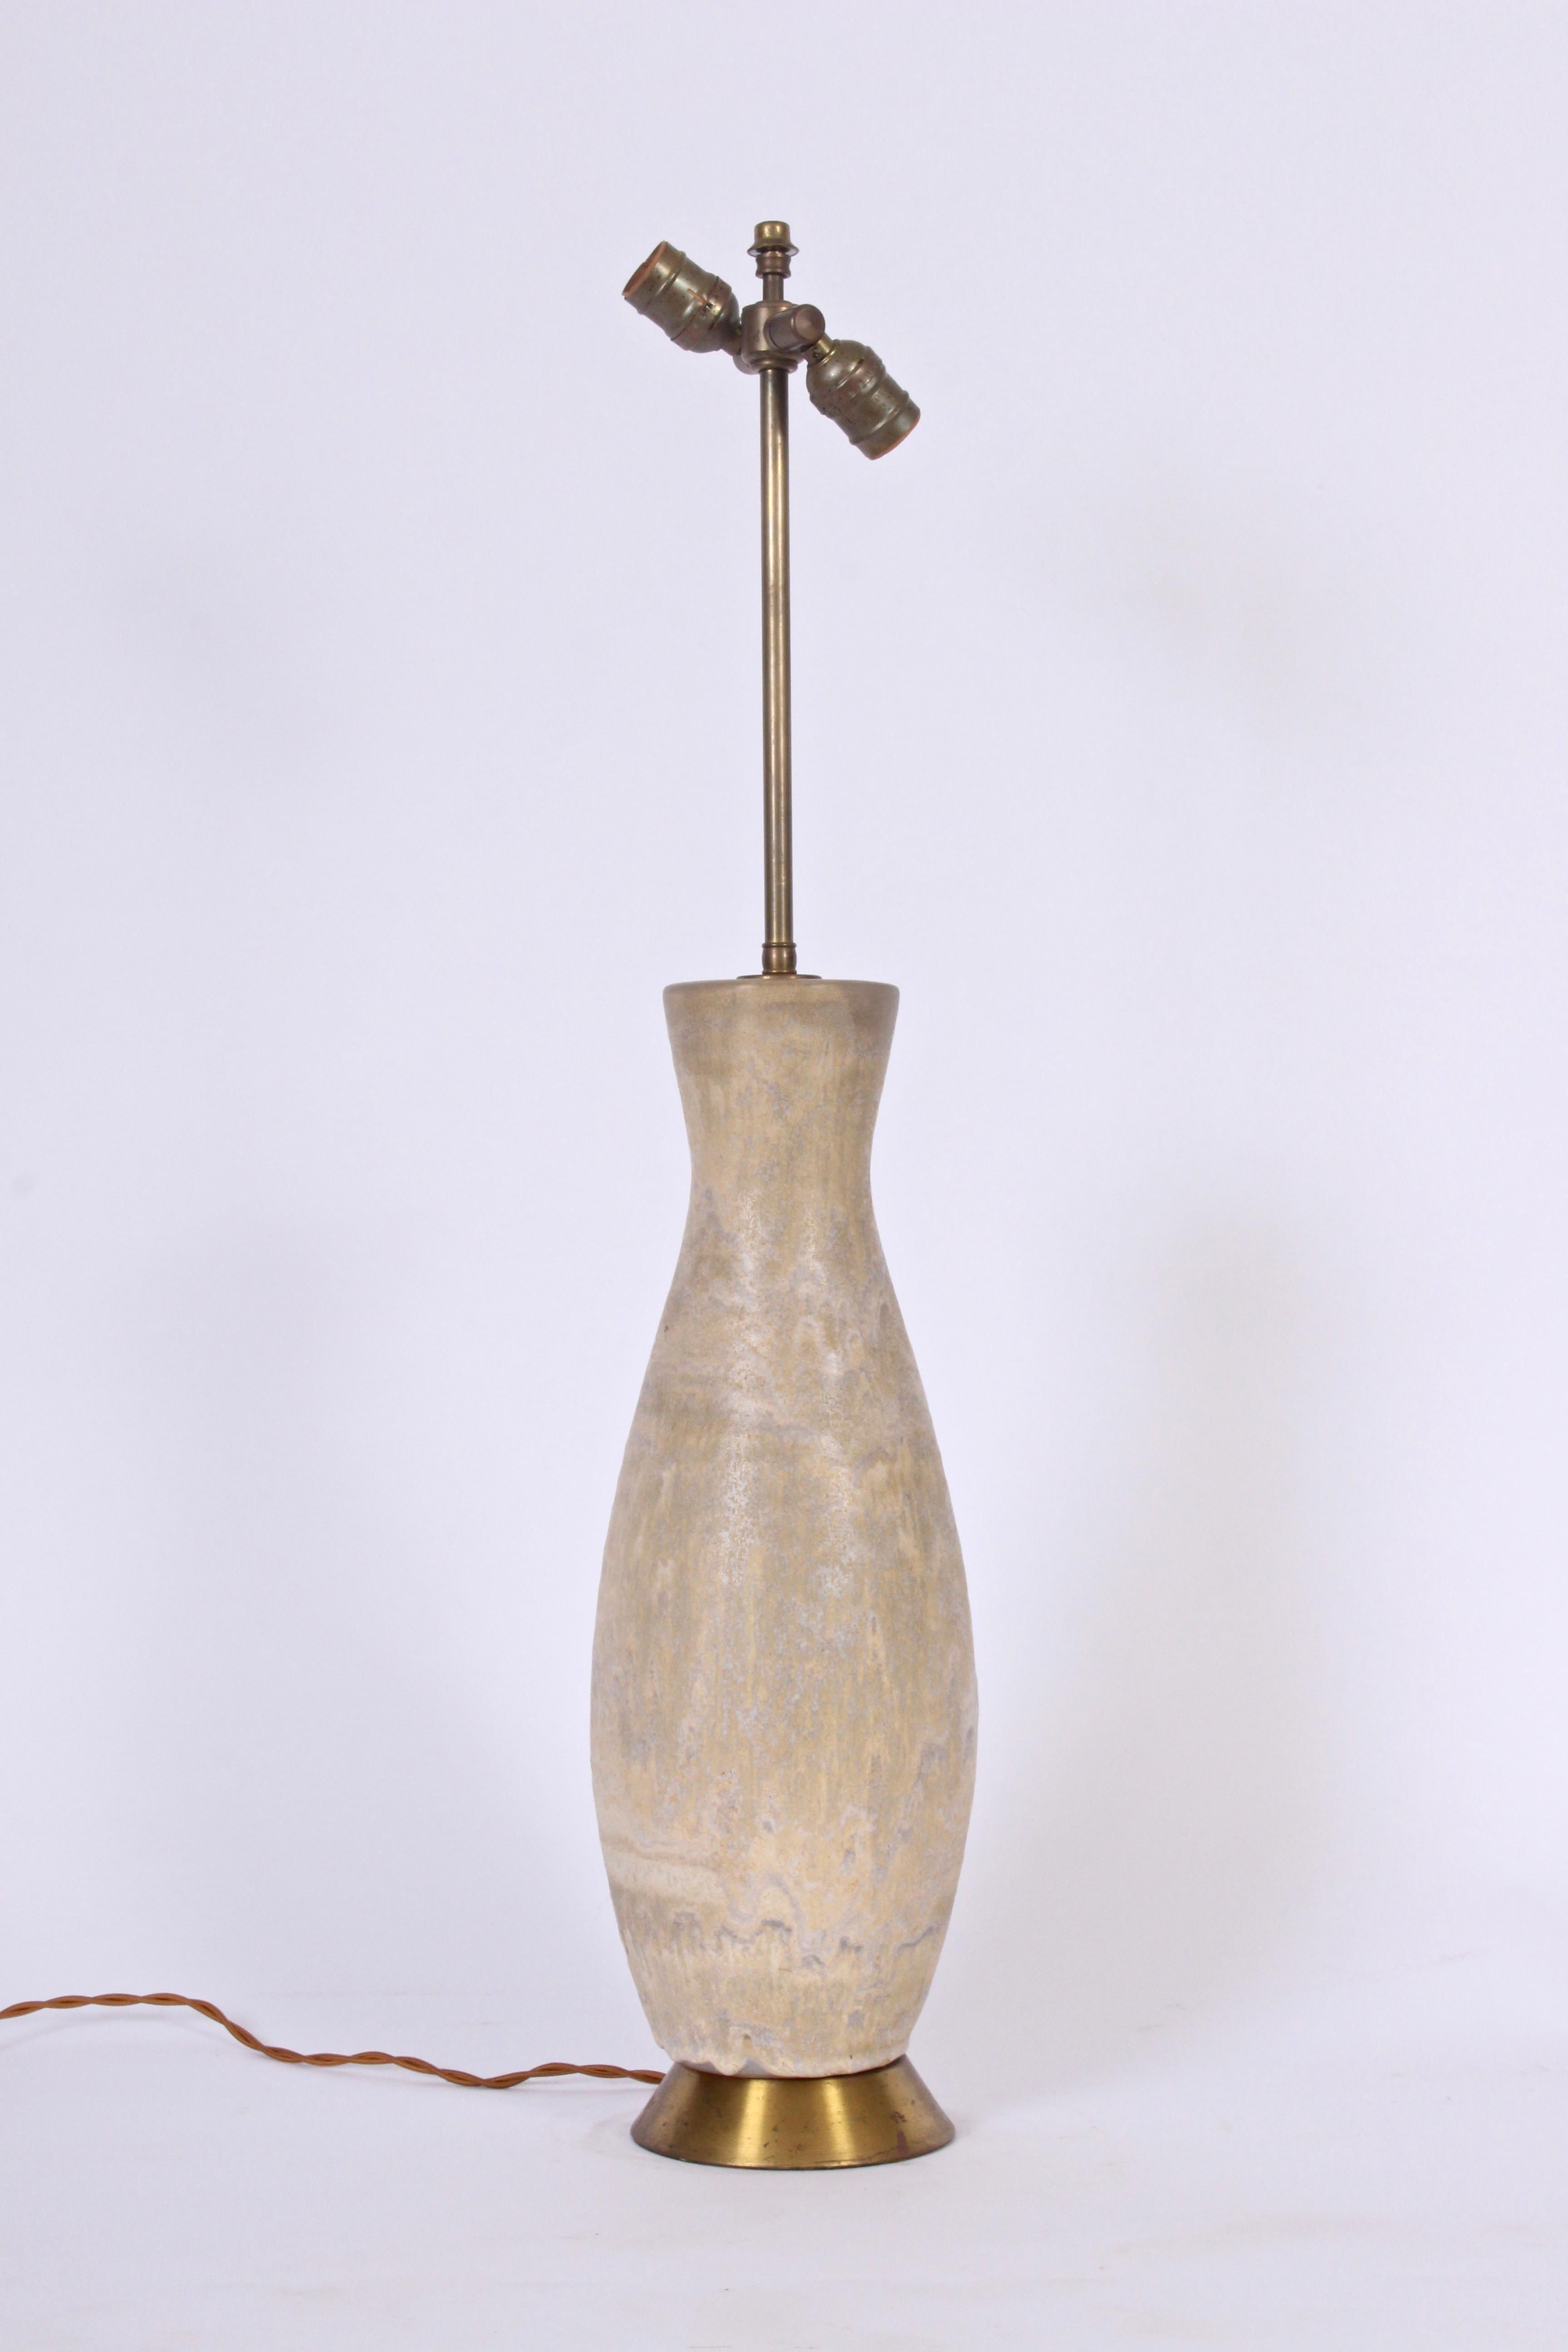 Substantial Lee Rosen for Design Technics handcrafted natural table lamp from the 1950's. Featuring a corseted bottle form with drip glaze in soft palettes of beige, pale yellow, cream, pale gray coloration, with adjustable double sockets and flared